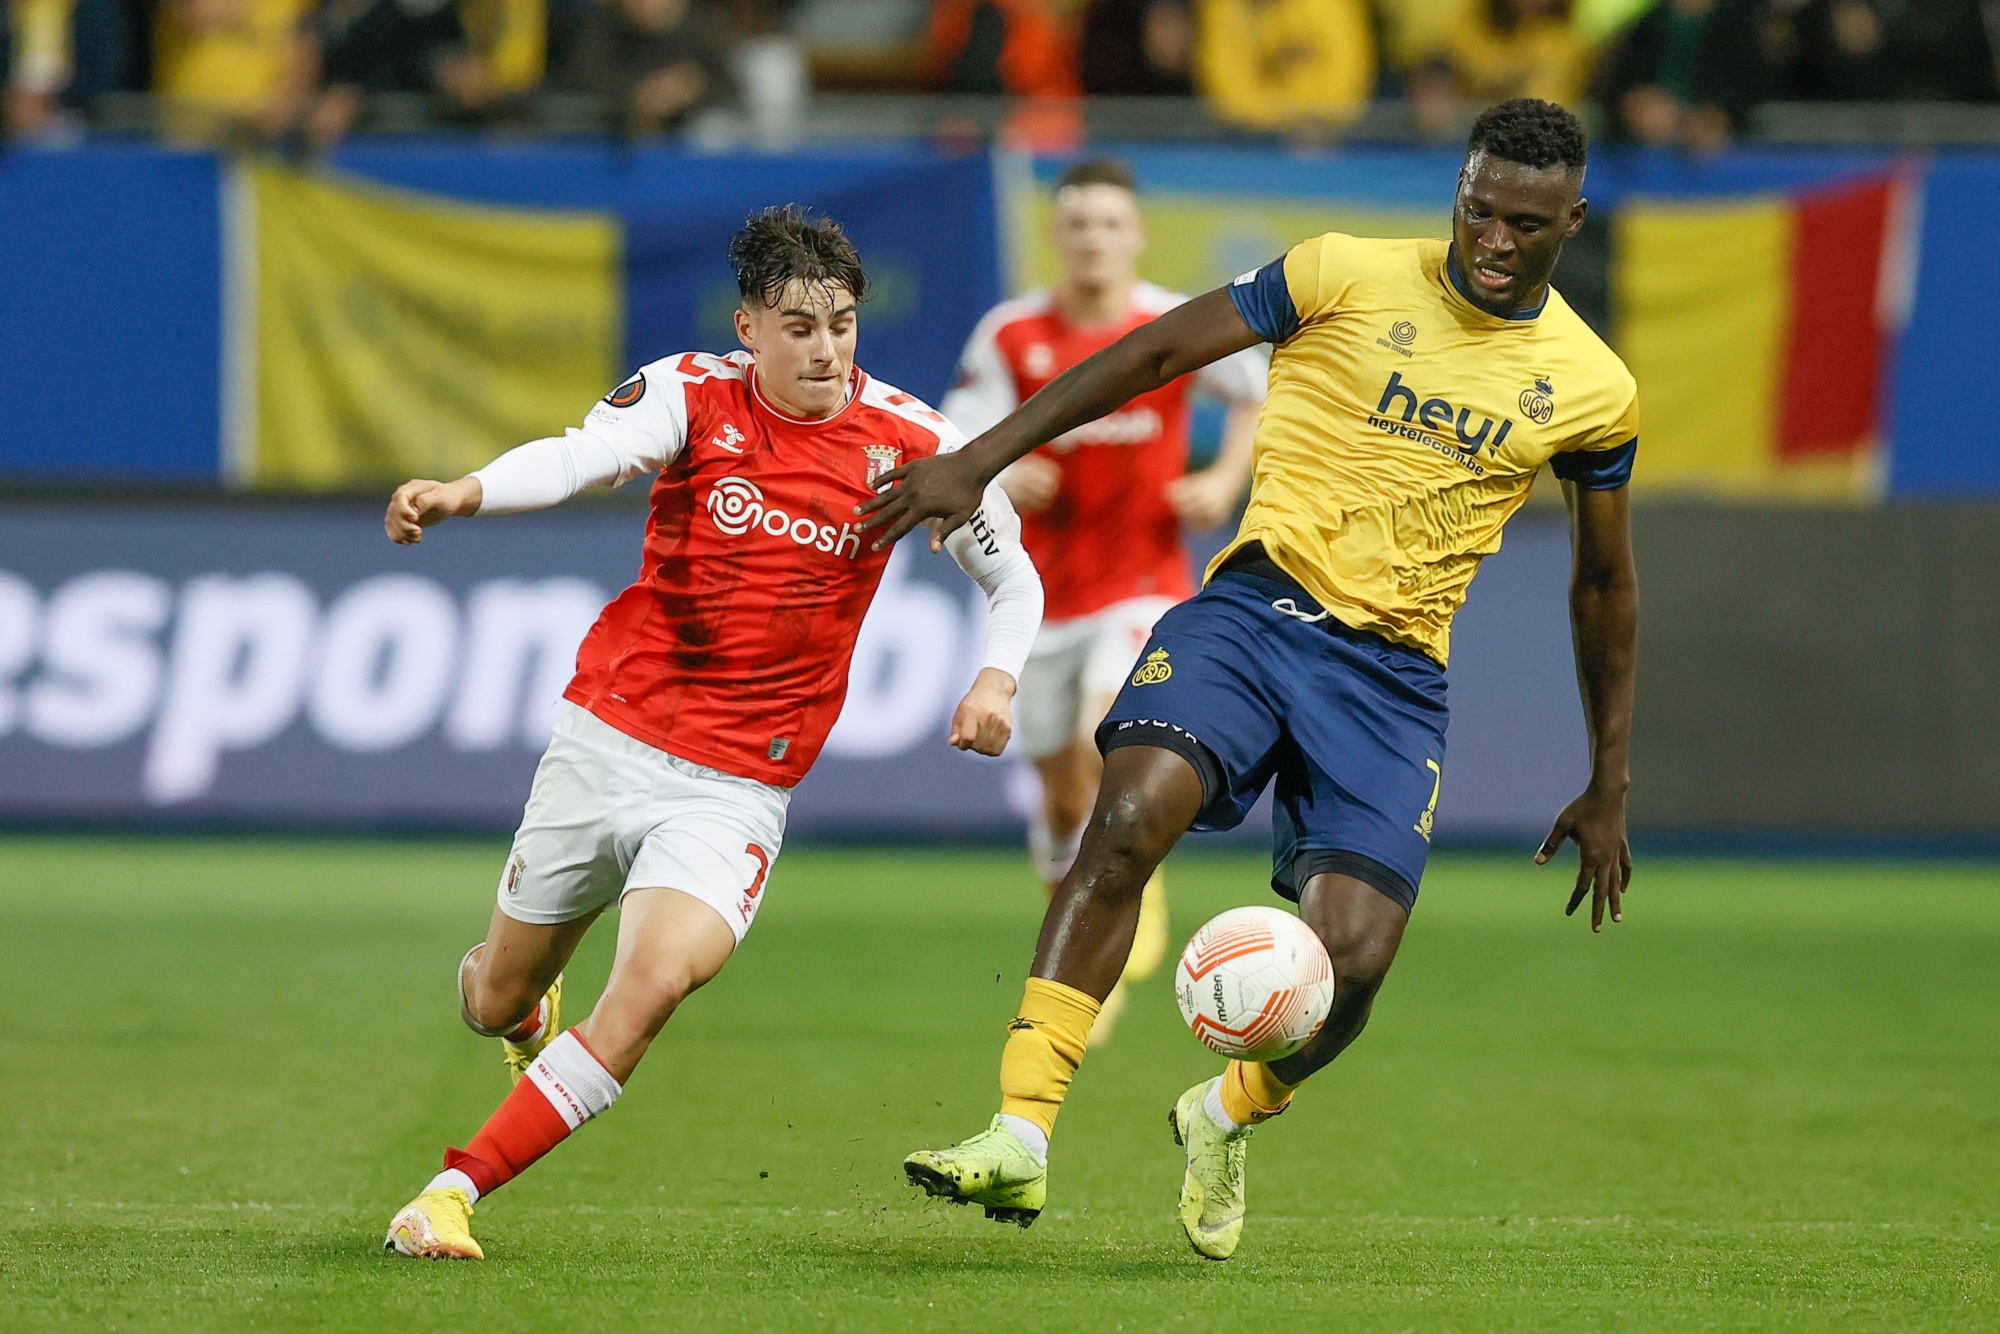 Braga's Rodrigo Gomes and Union's Victor Boniface fight for the ball during a match between Belgian soccer team Royale Union Saint-Gilloise and the Portugese club SC Braga, Thursday 13 October 2022 in Heverlee, Belgium, the fourth game out of six in the group stage of the UEFA Europa League competition. BELGA PHOTO BRUNO FAHY